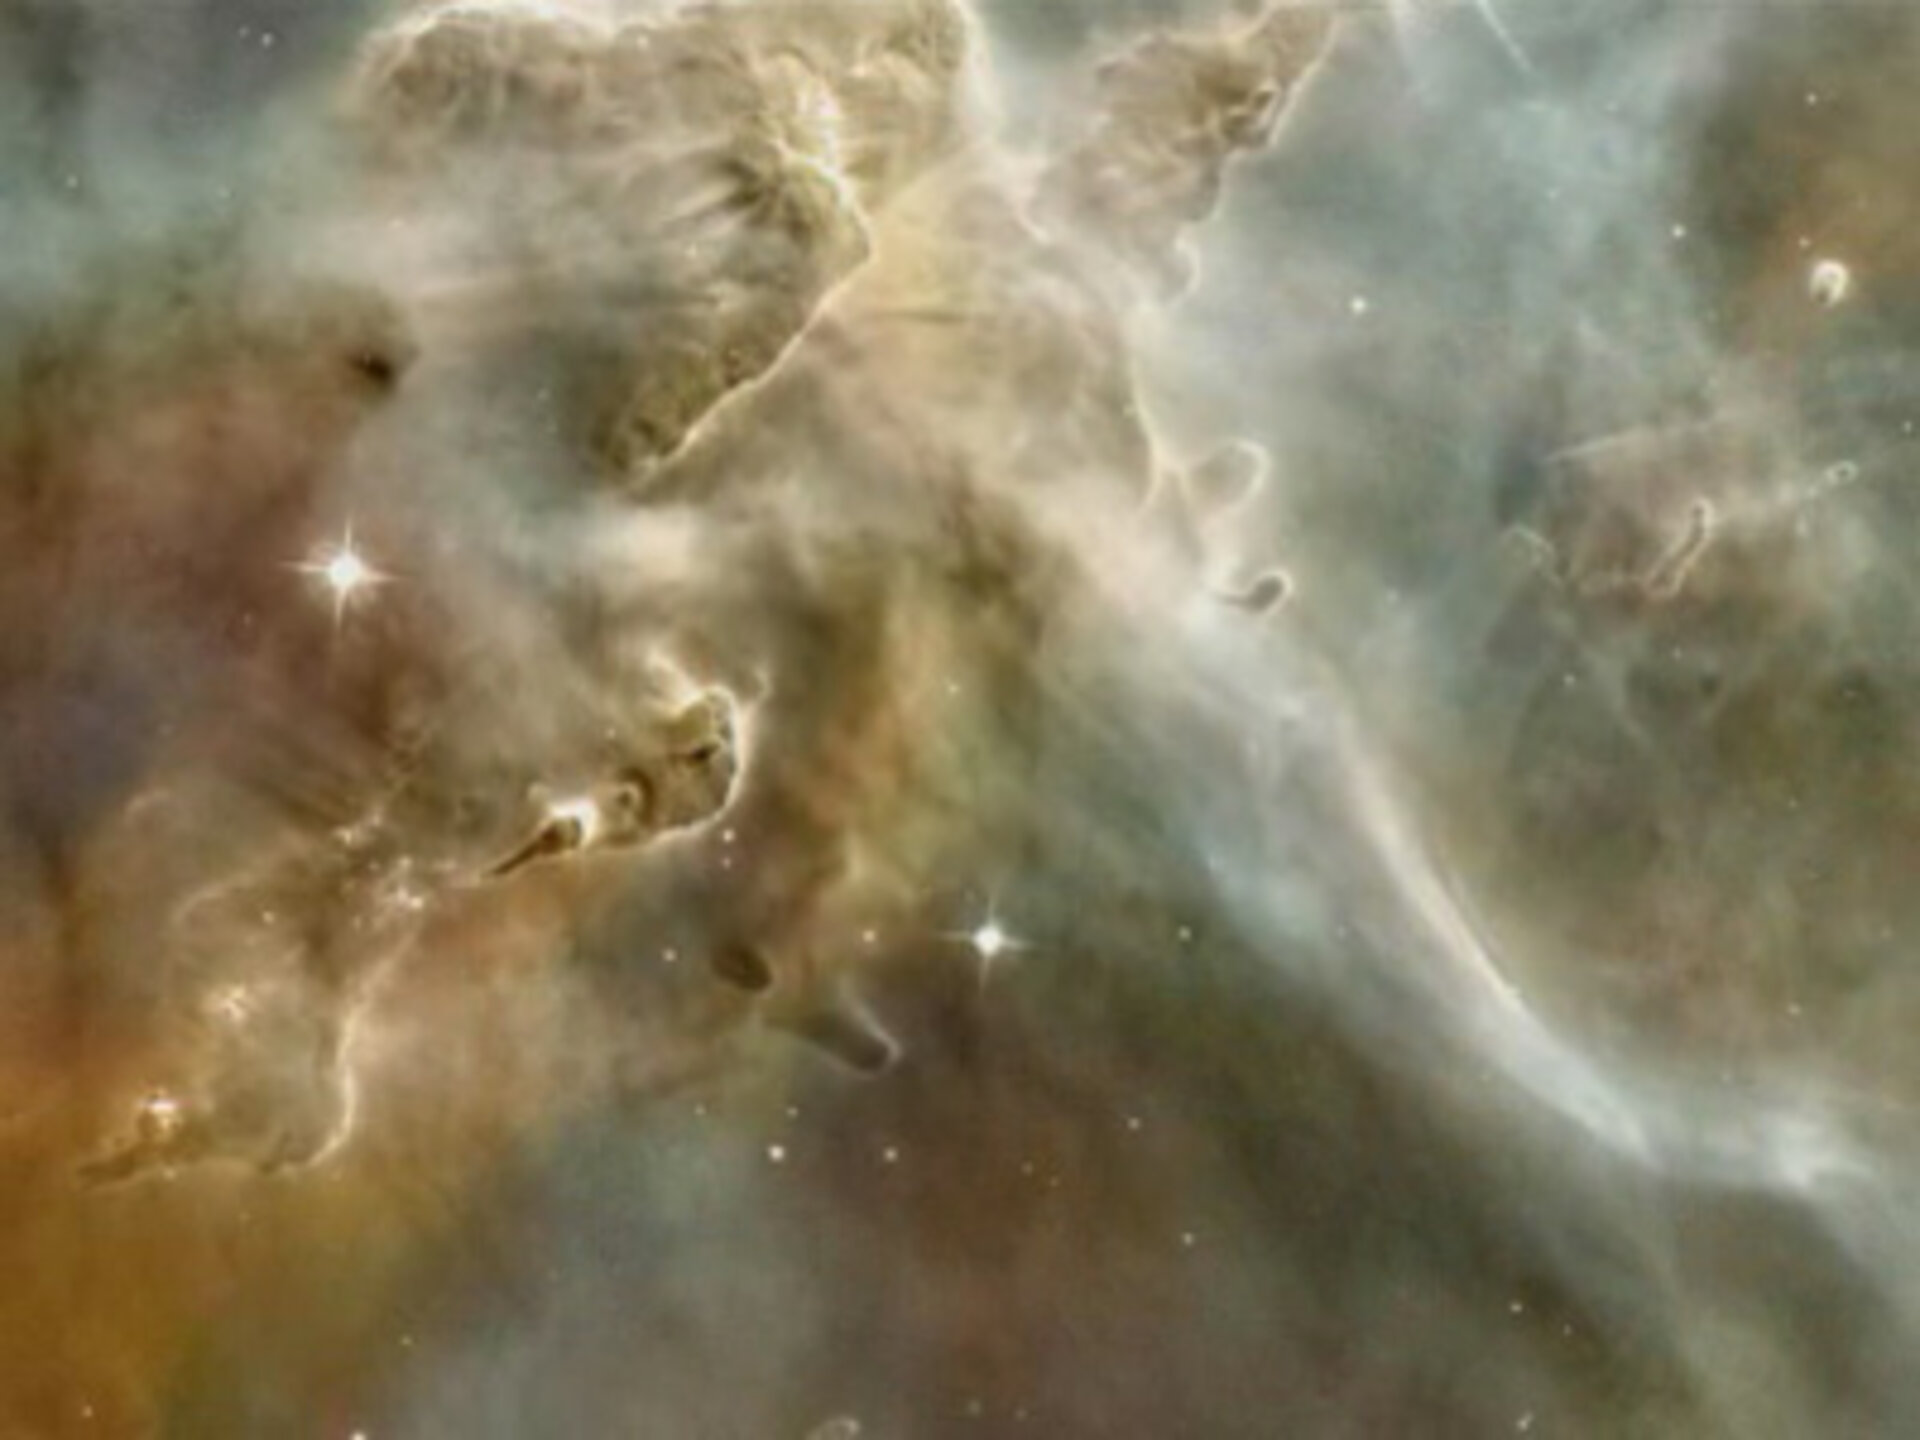 Zooming and panning on the Carina Nebula